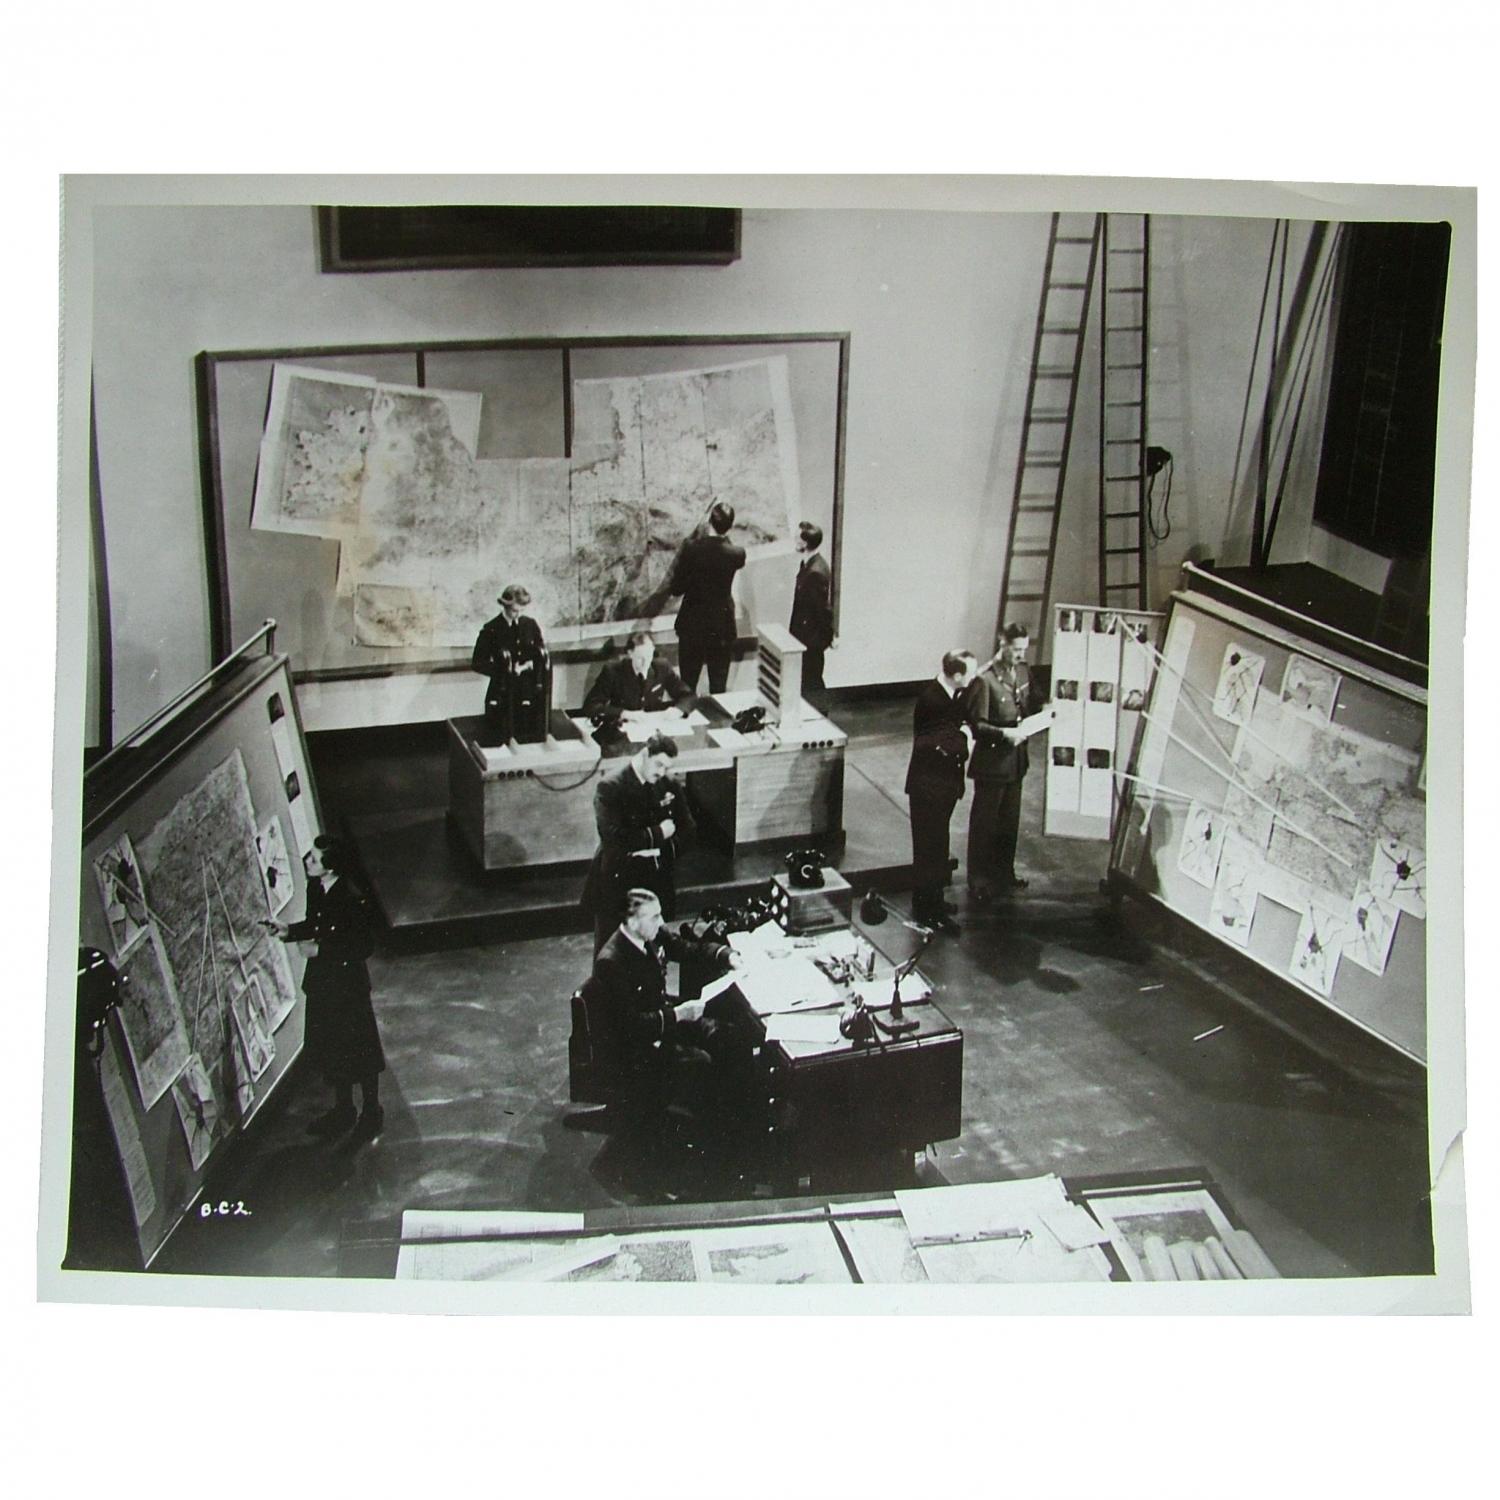 RAF Press Photo, 'Ops' Room, High Wycombe